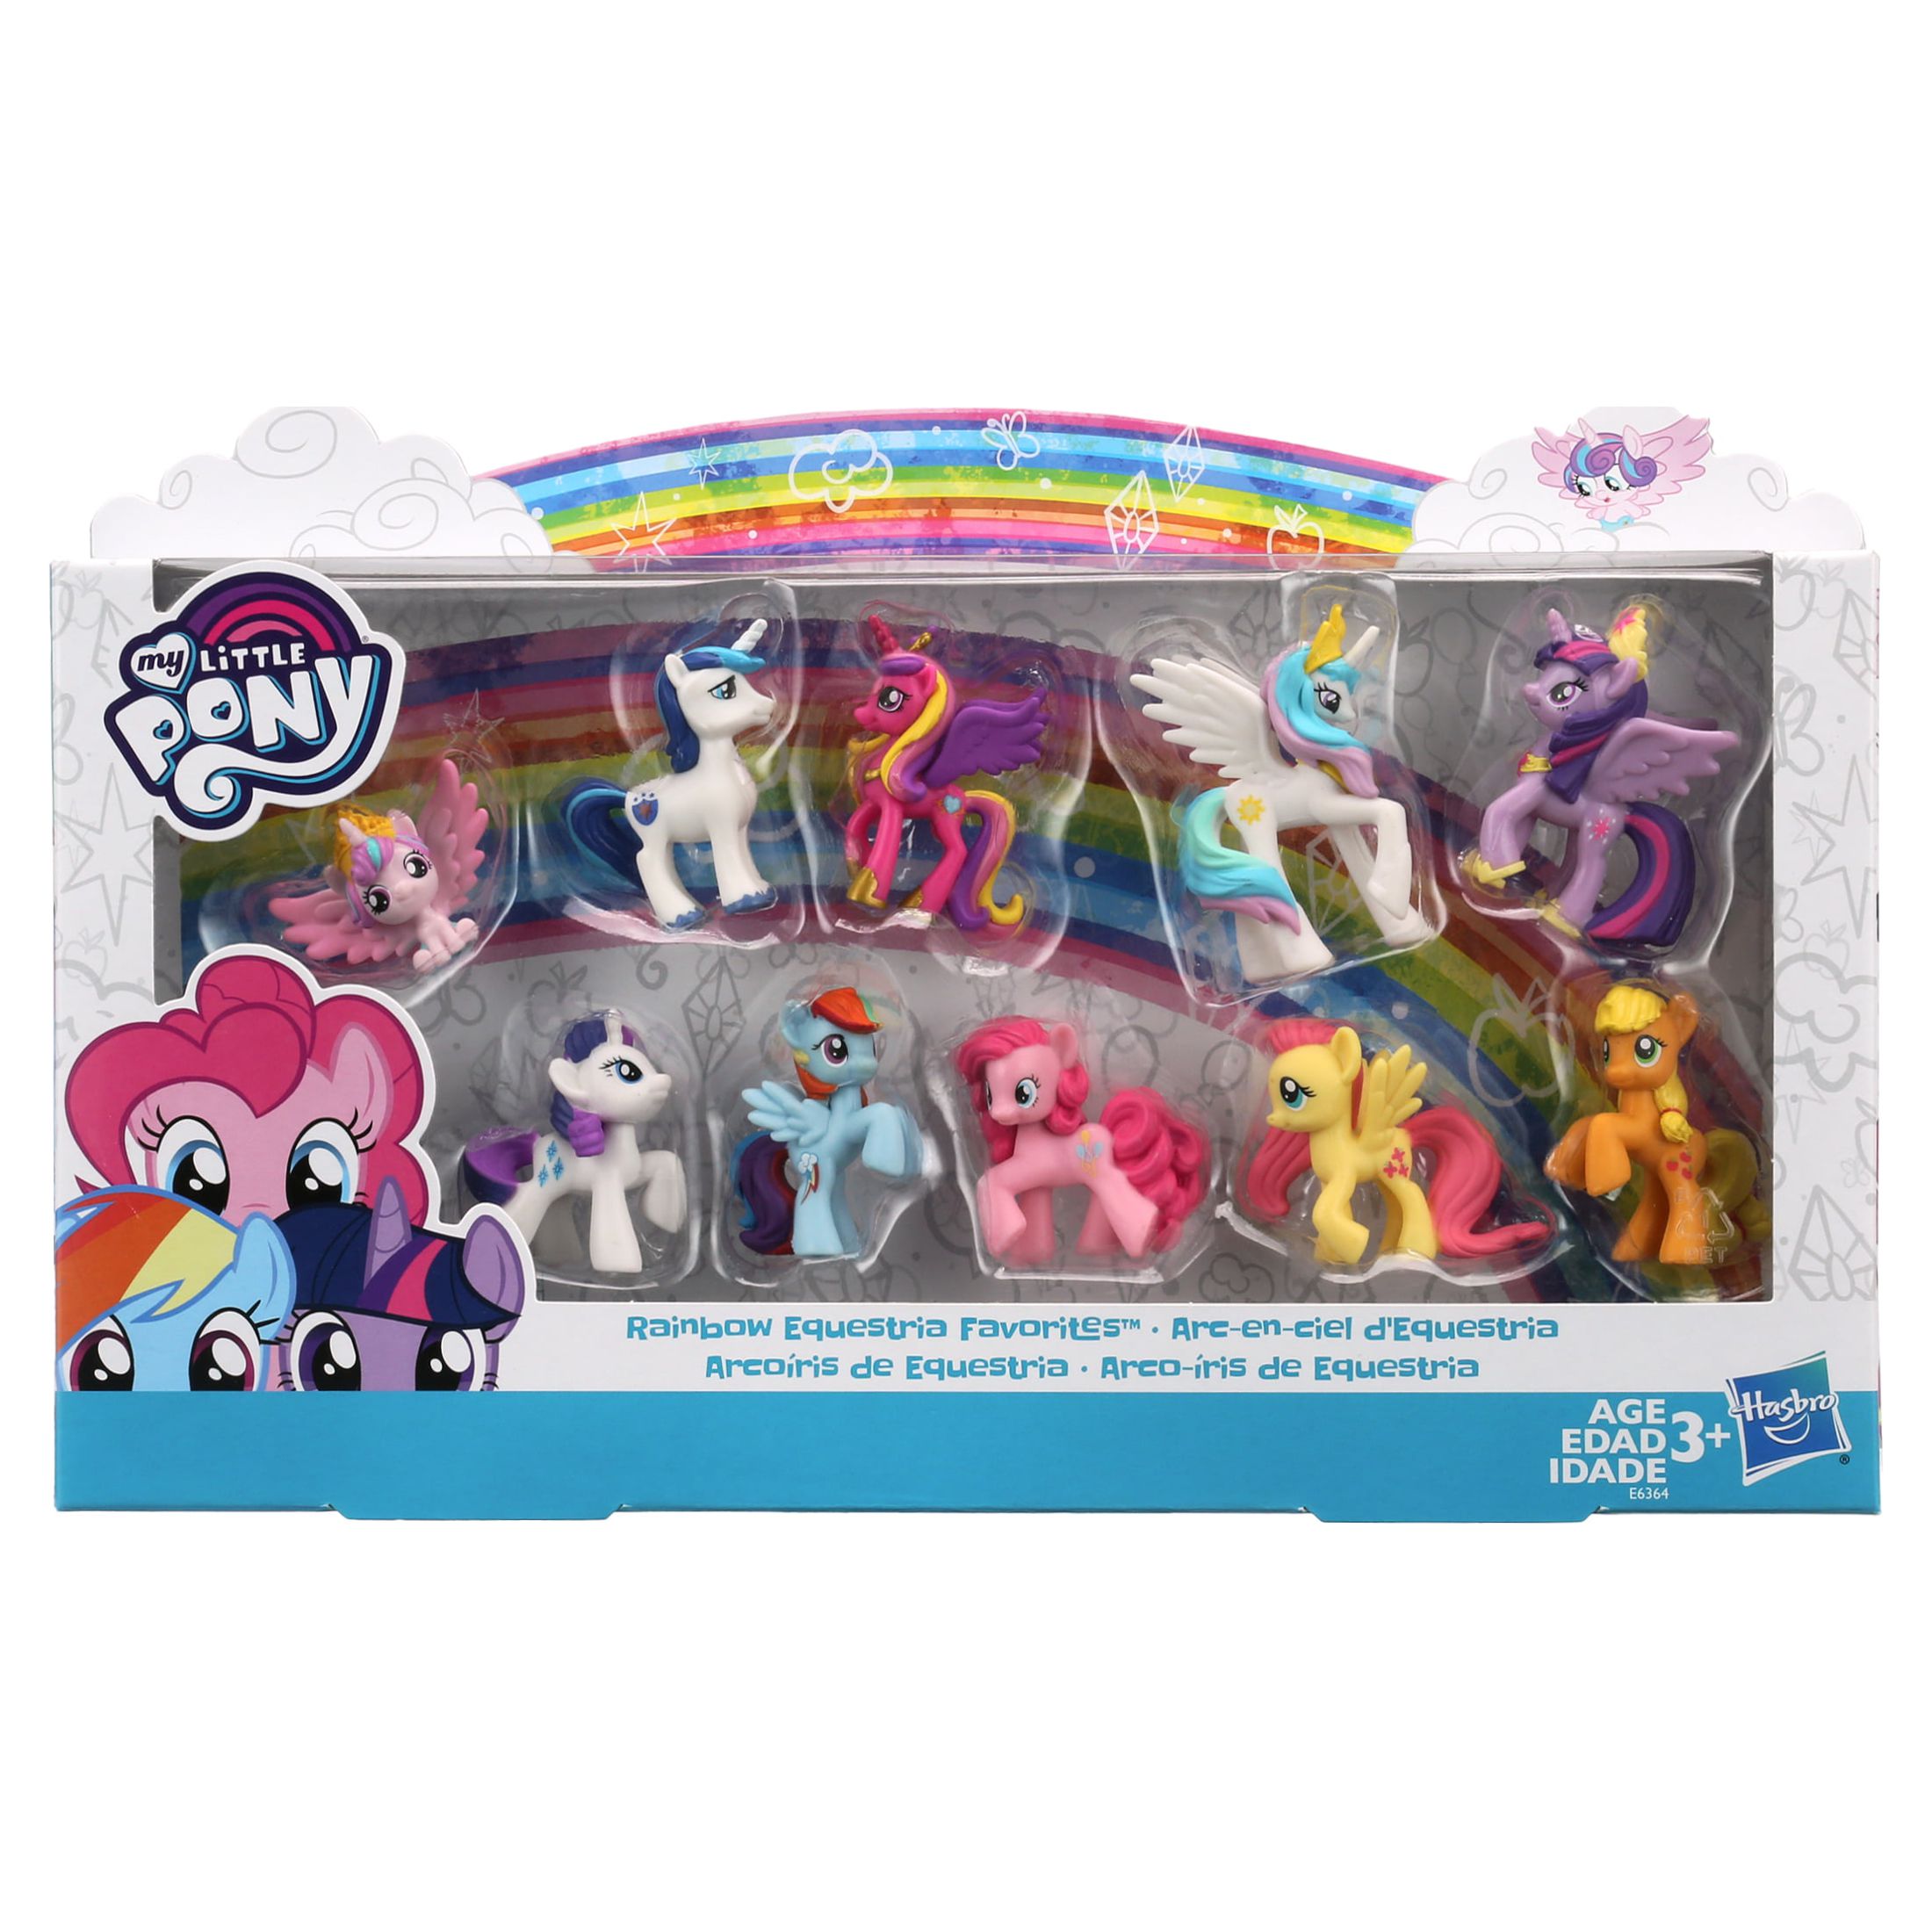 My Little Pony: Rainbow Equestria Favorites 13-Inch Doll Kids Toy for Boys and Girls - image 5 of 8